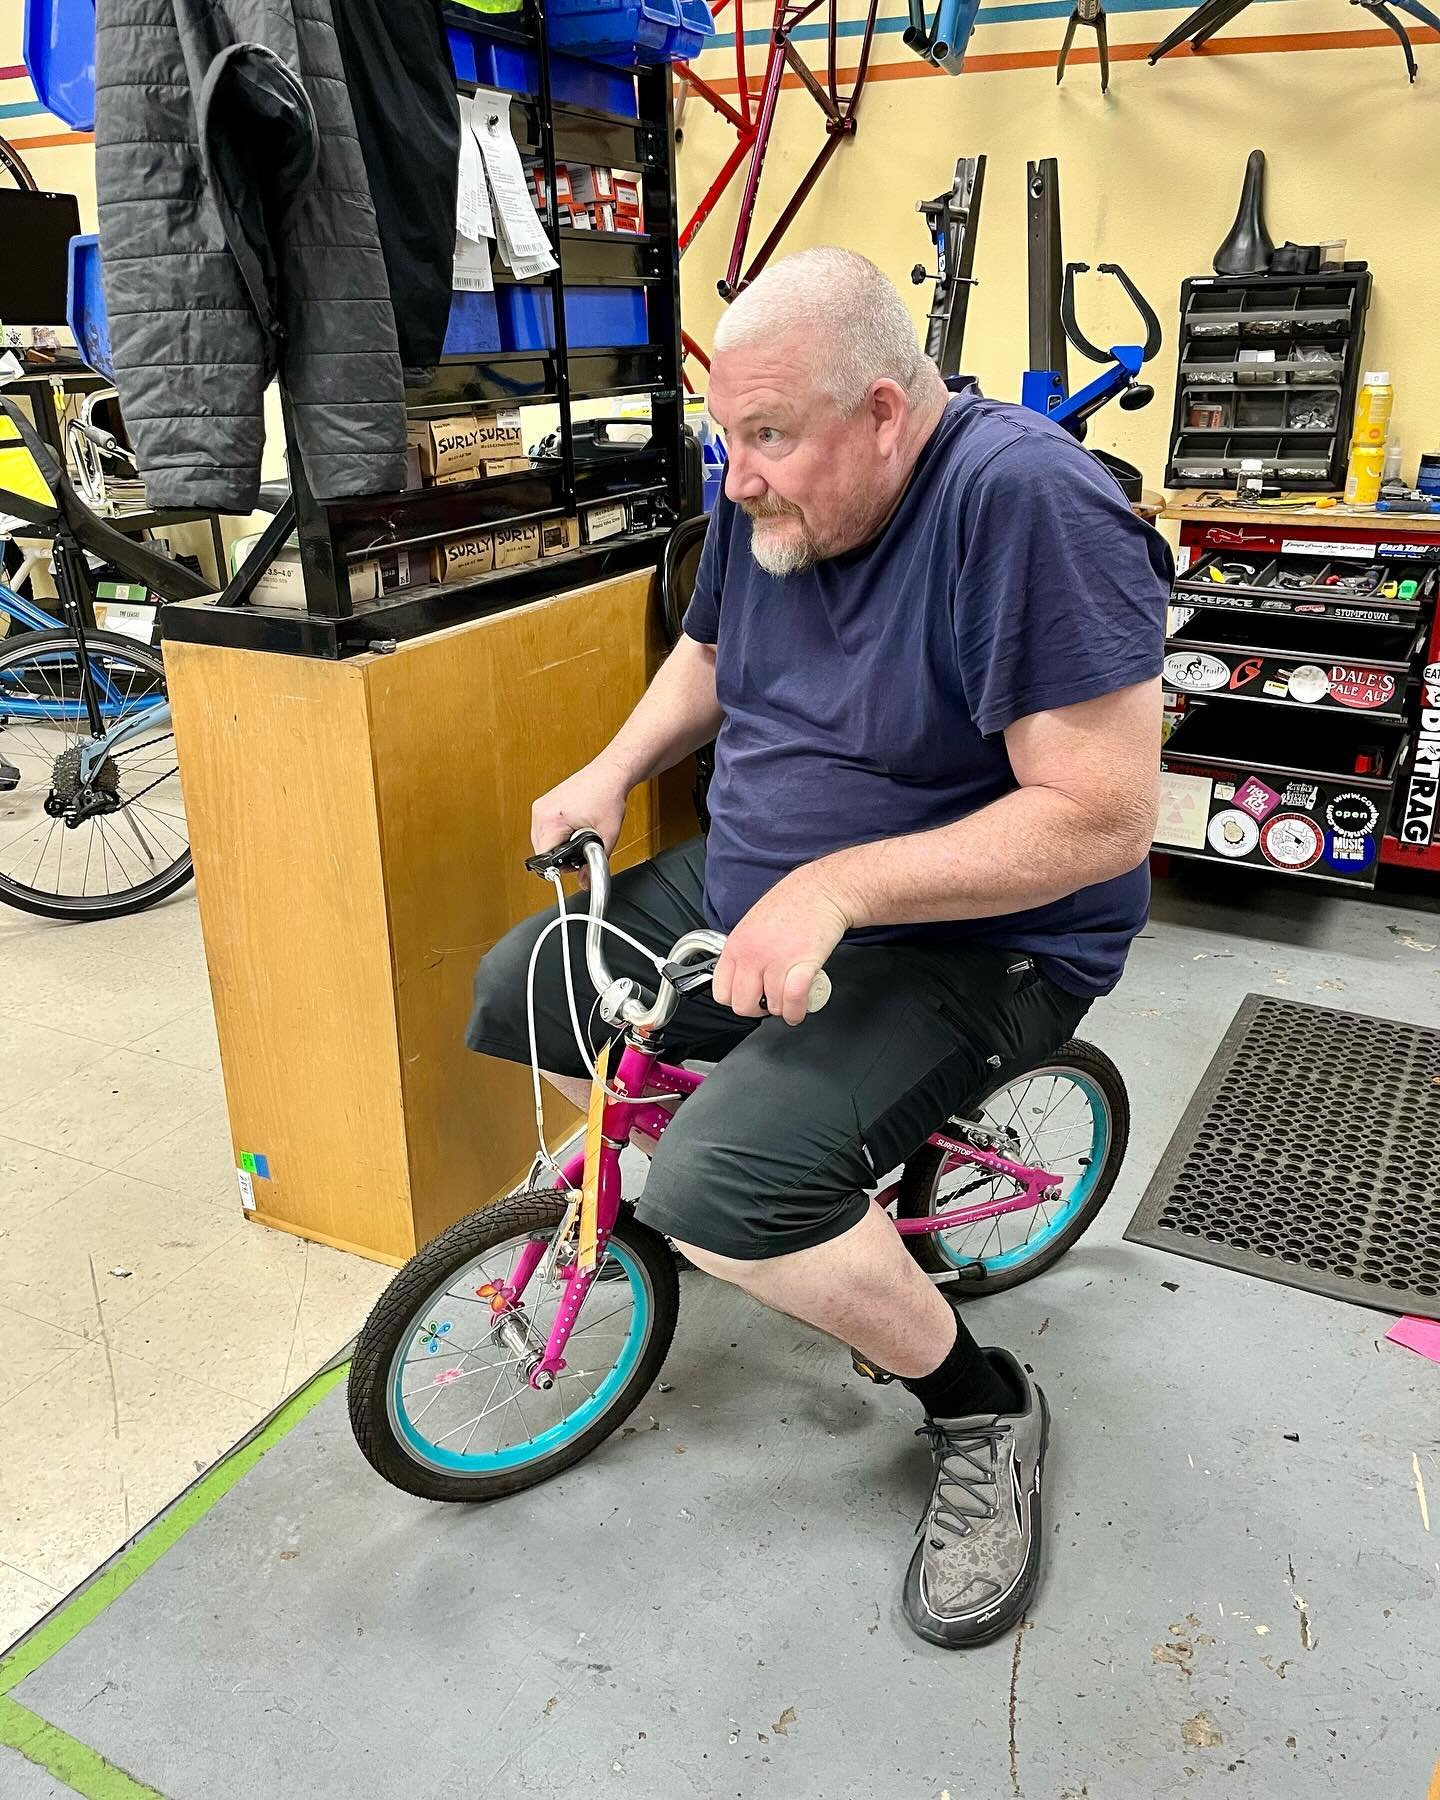 🚲The many faces of Shift&rsquo;s Lead Mechanic Andy (@biglimey ) while repairing and test-riding our tiny refurbished bikes&mdash;en route to be donated through our Shift Kidz program with support from our community partners @fb4keugspfld .